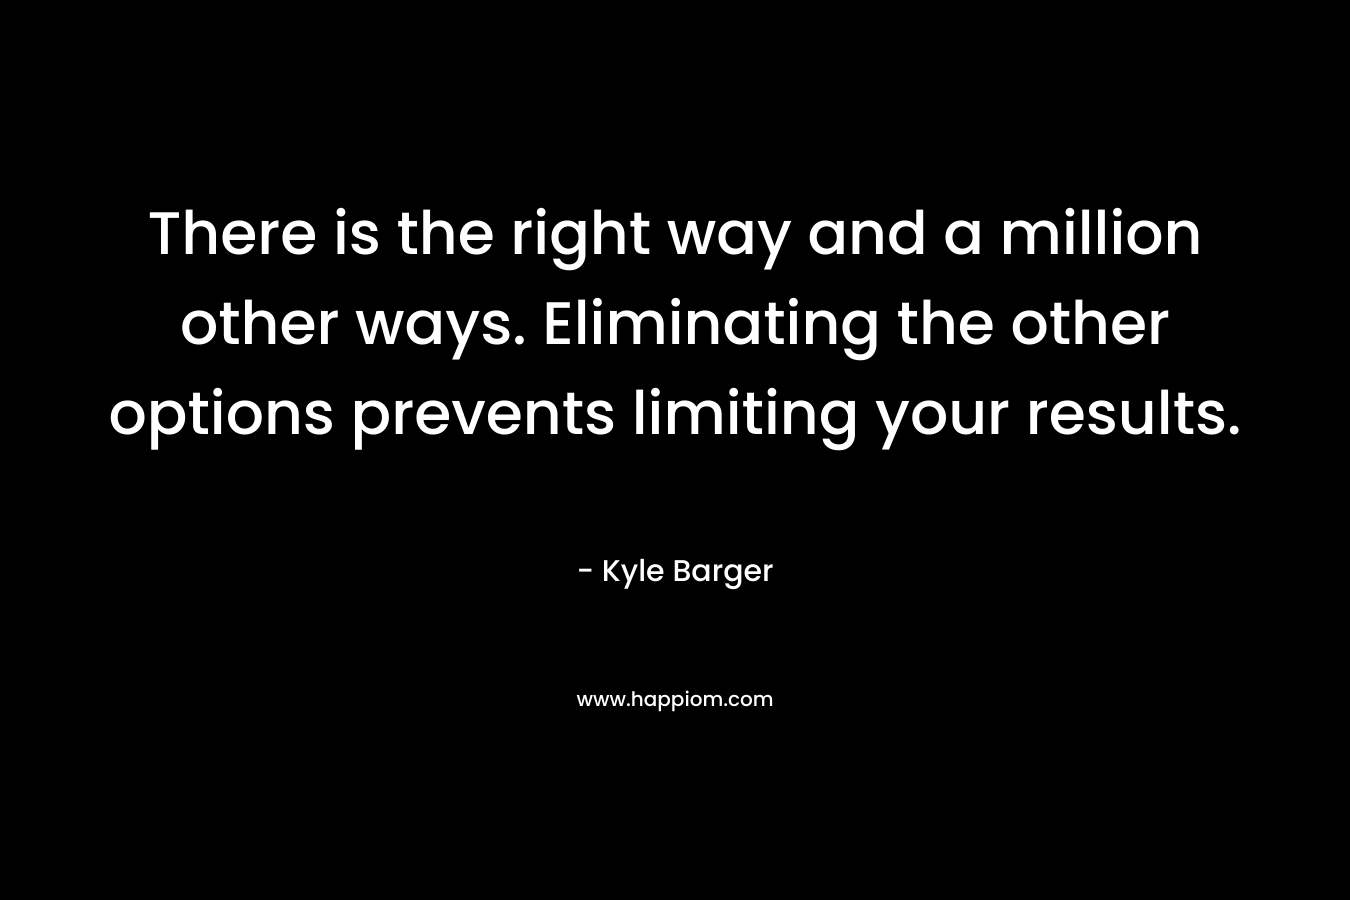 There is the right way and a million other ways. Eliminating the other options prevents limiting your results. – Kyle Barger